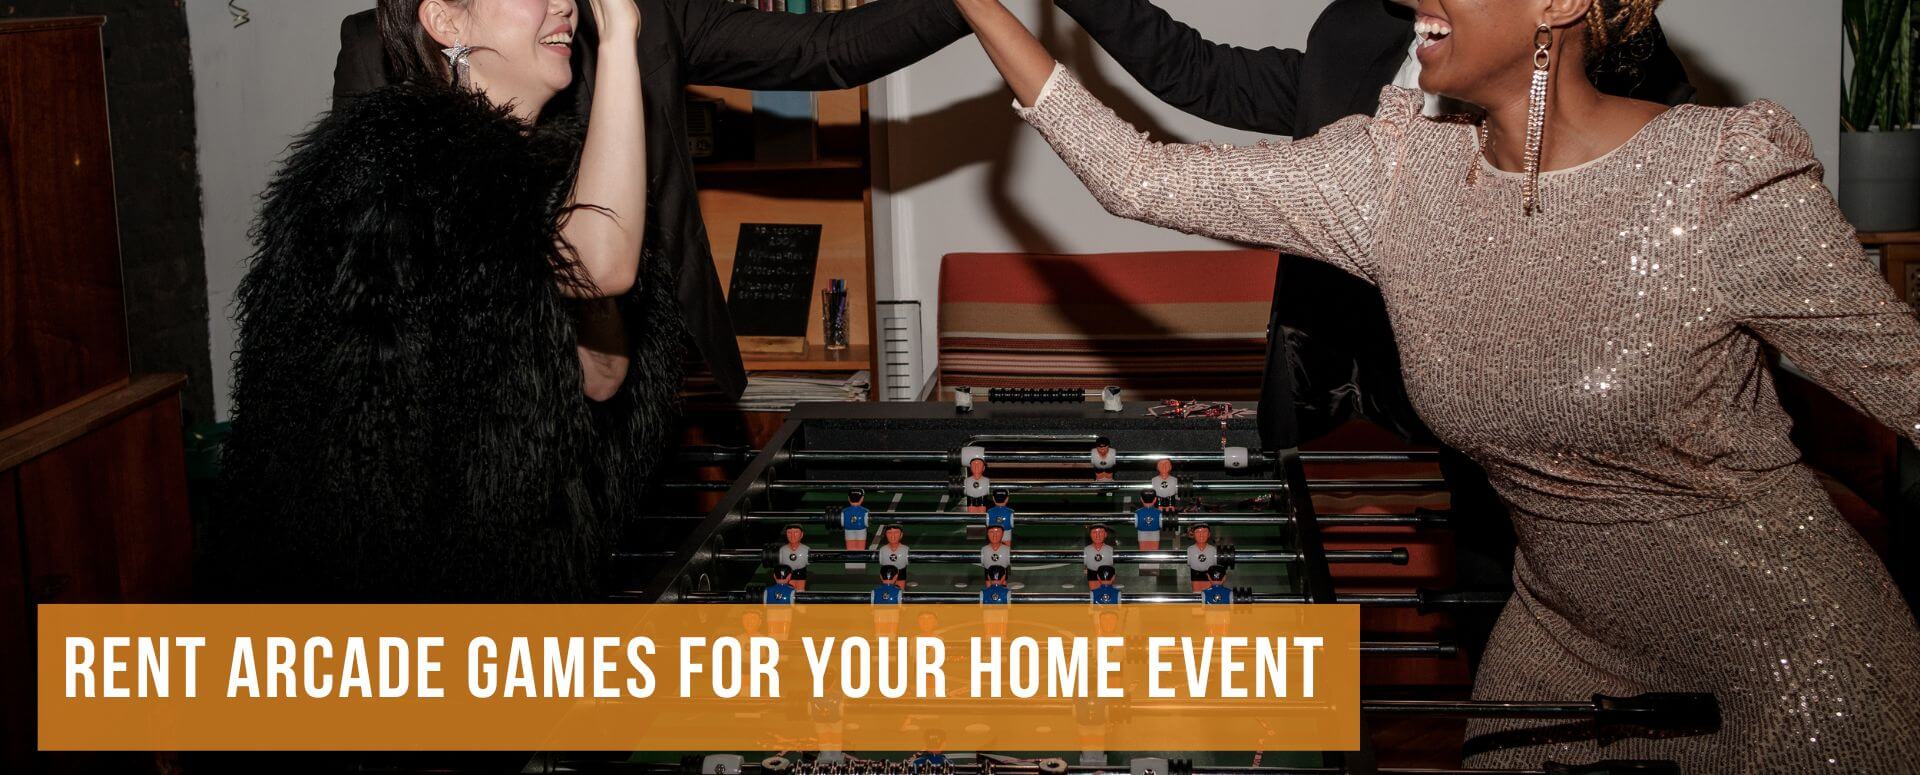 Playing Foosball at Home Event